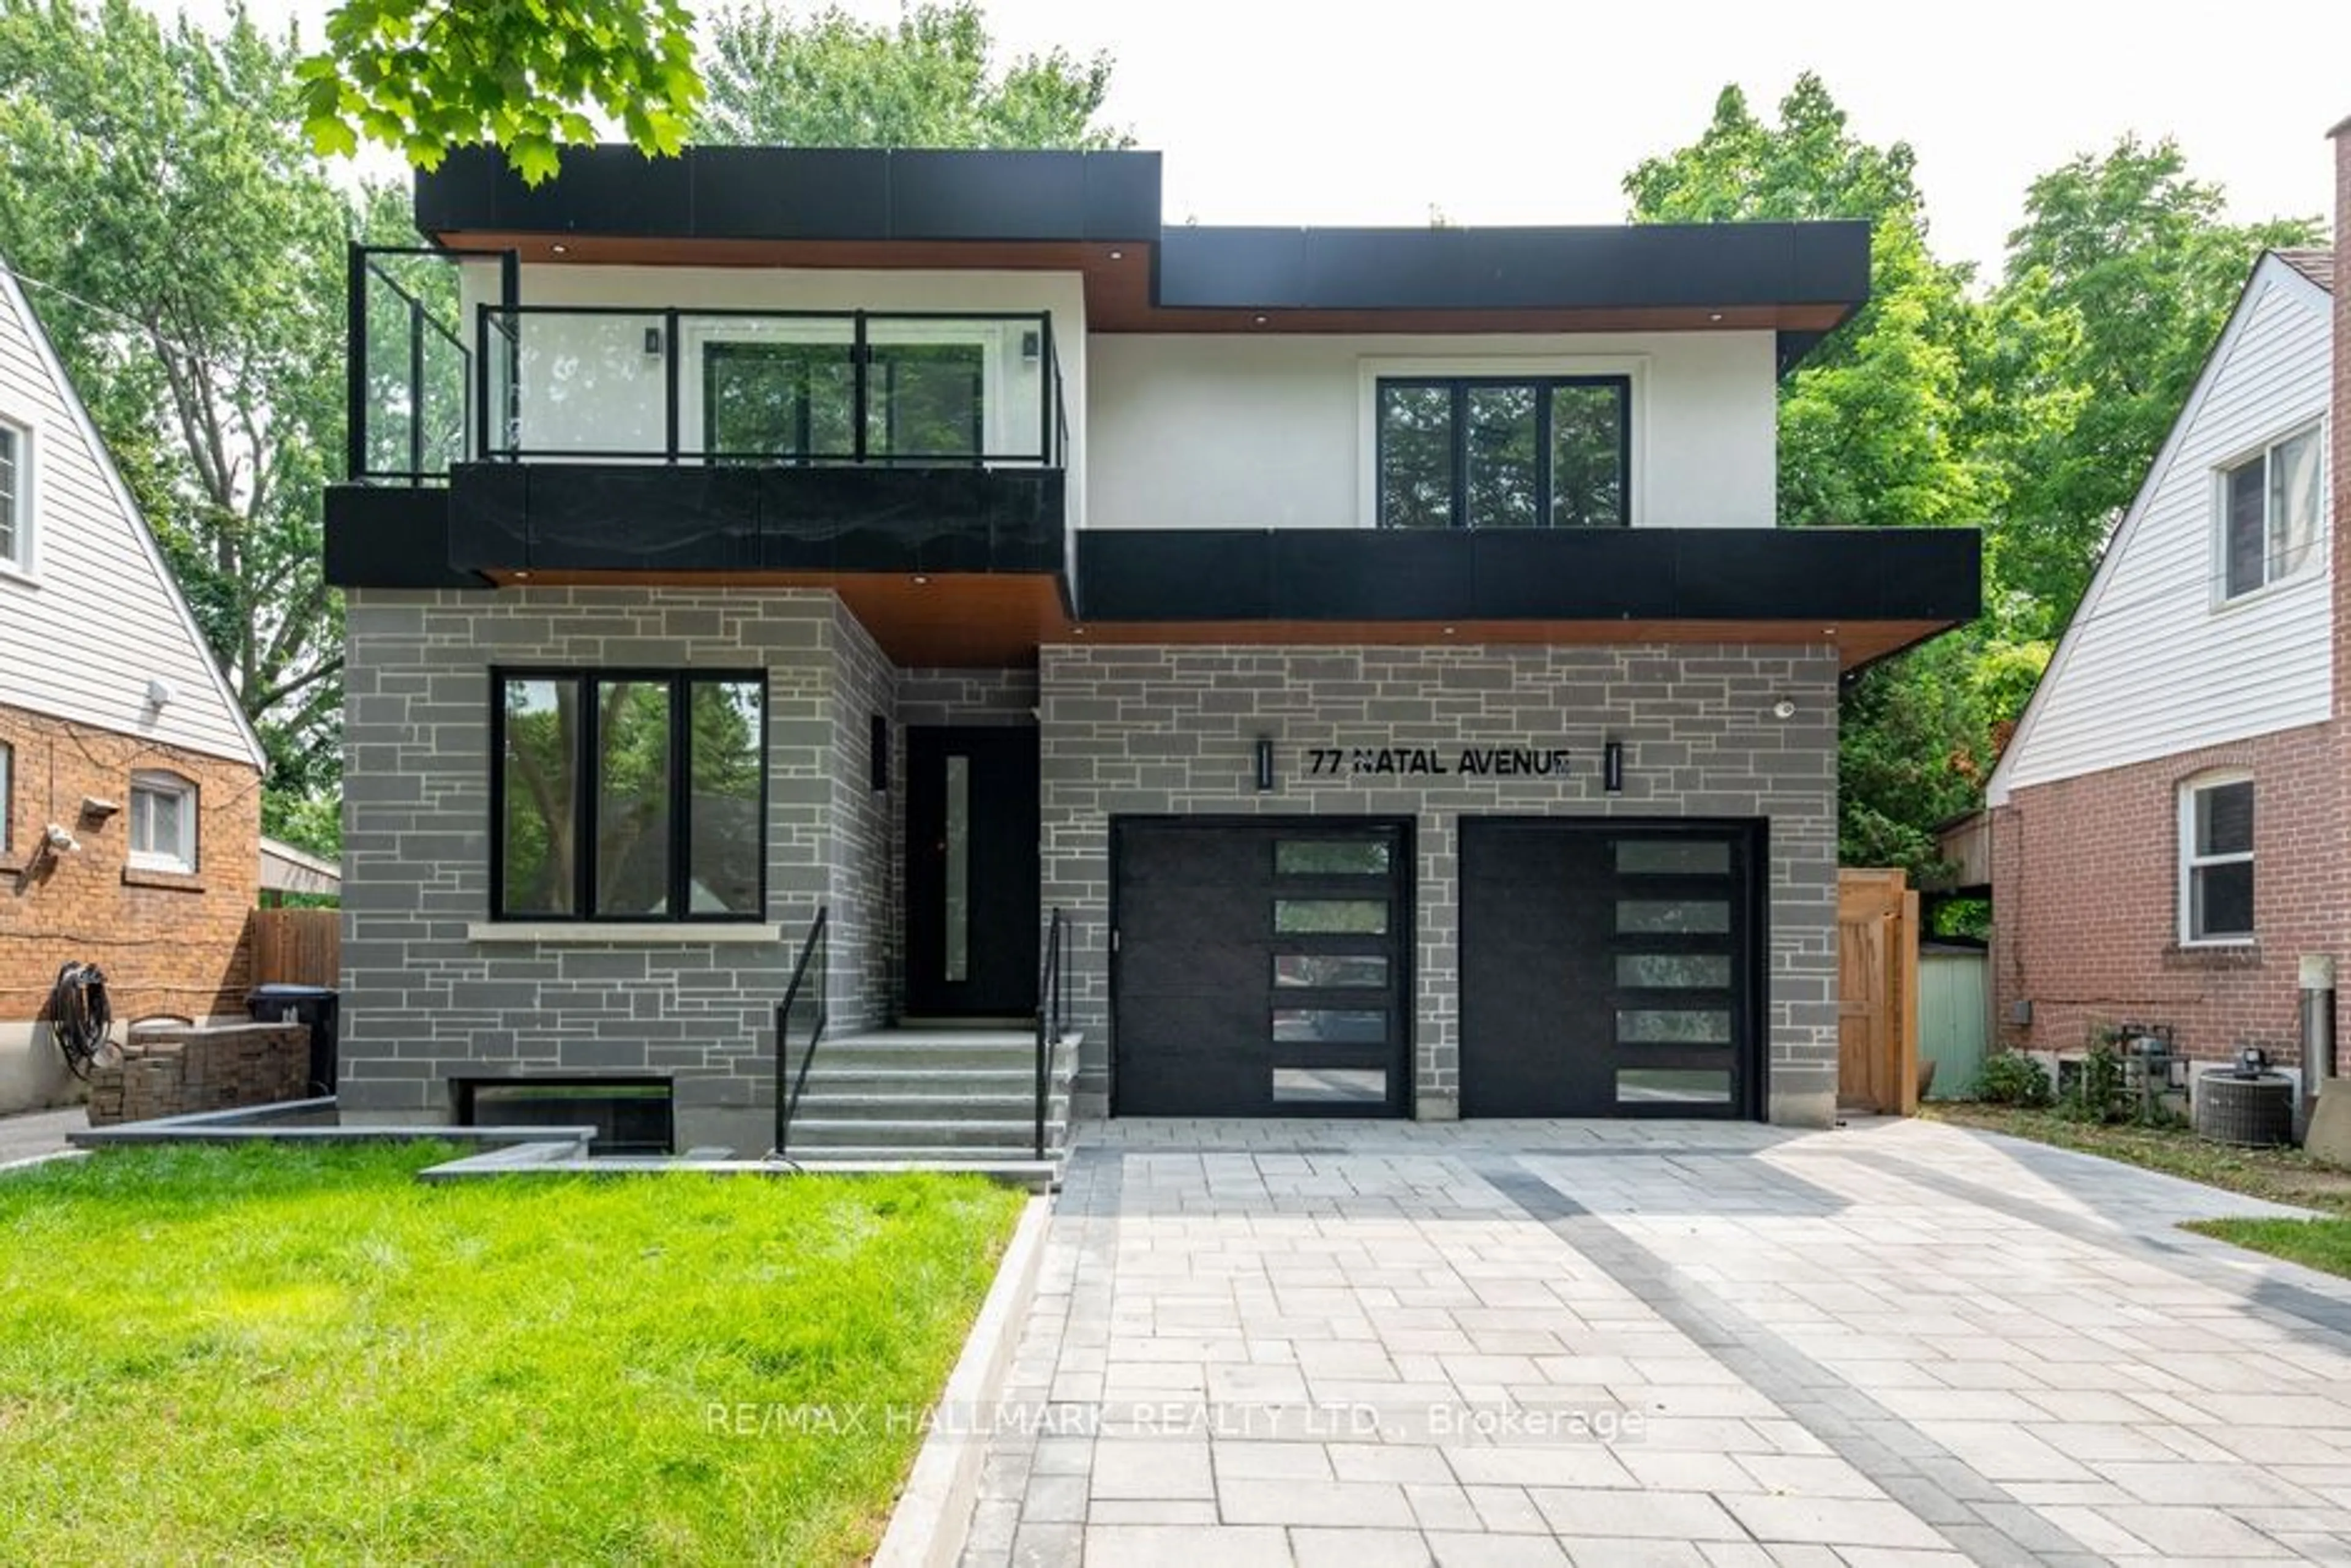 Home with brick exterior material for 77 Natal Ave, Toronto Ontario M1N 3V5